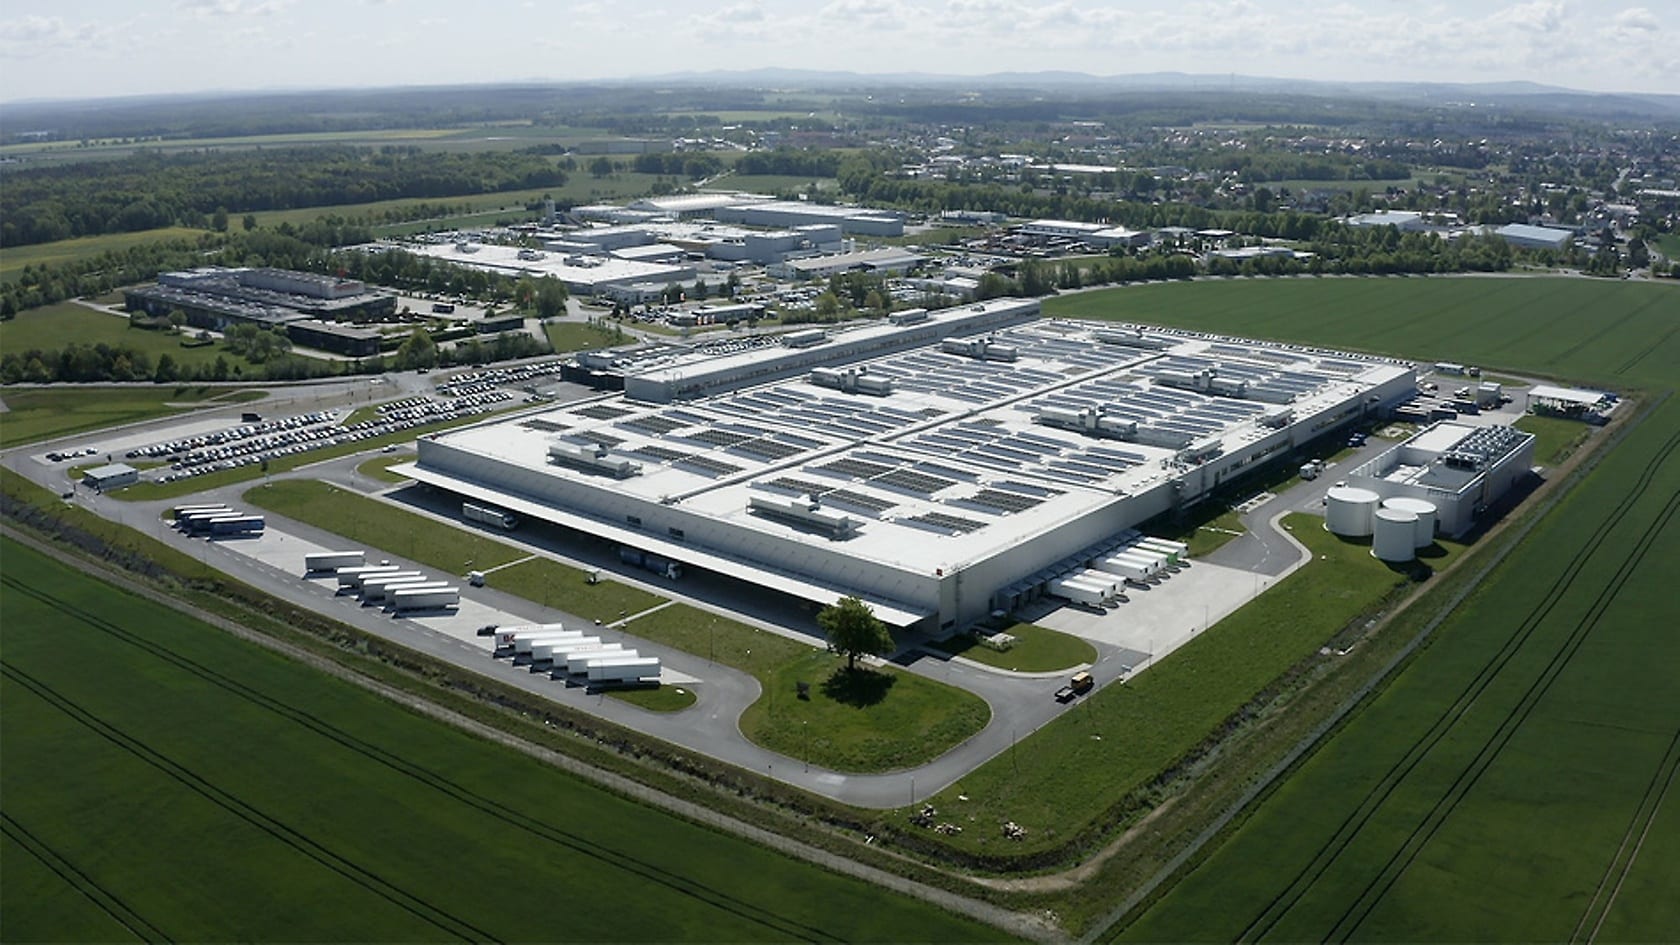 A glimpse into battery assembly at the Mercedes-Benz subsidiary Accumotive in Kamenz.